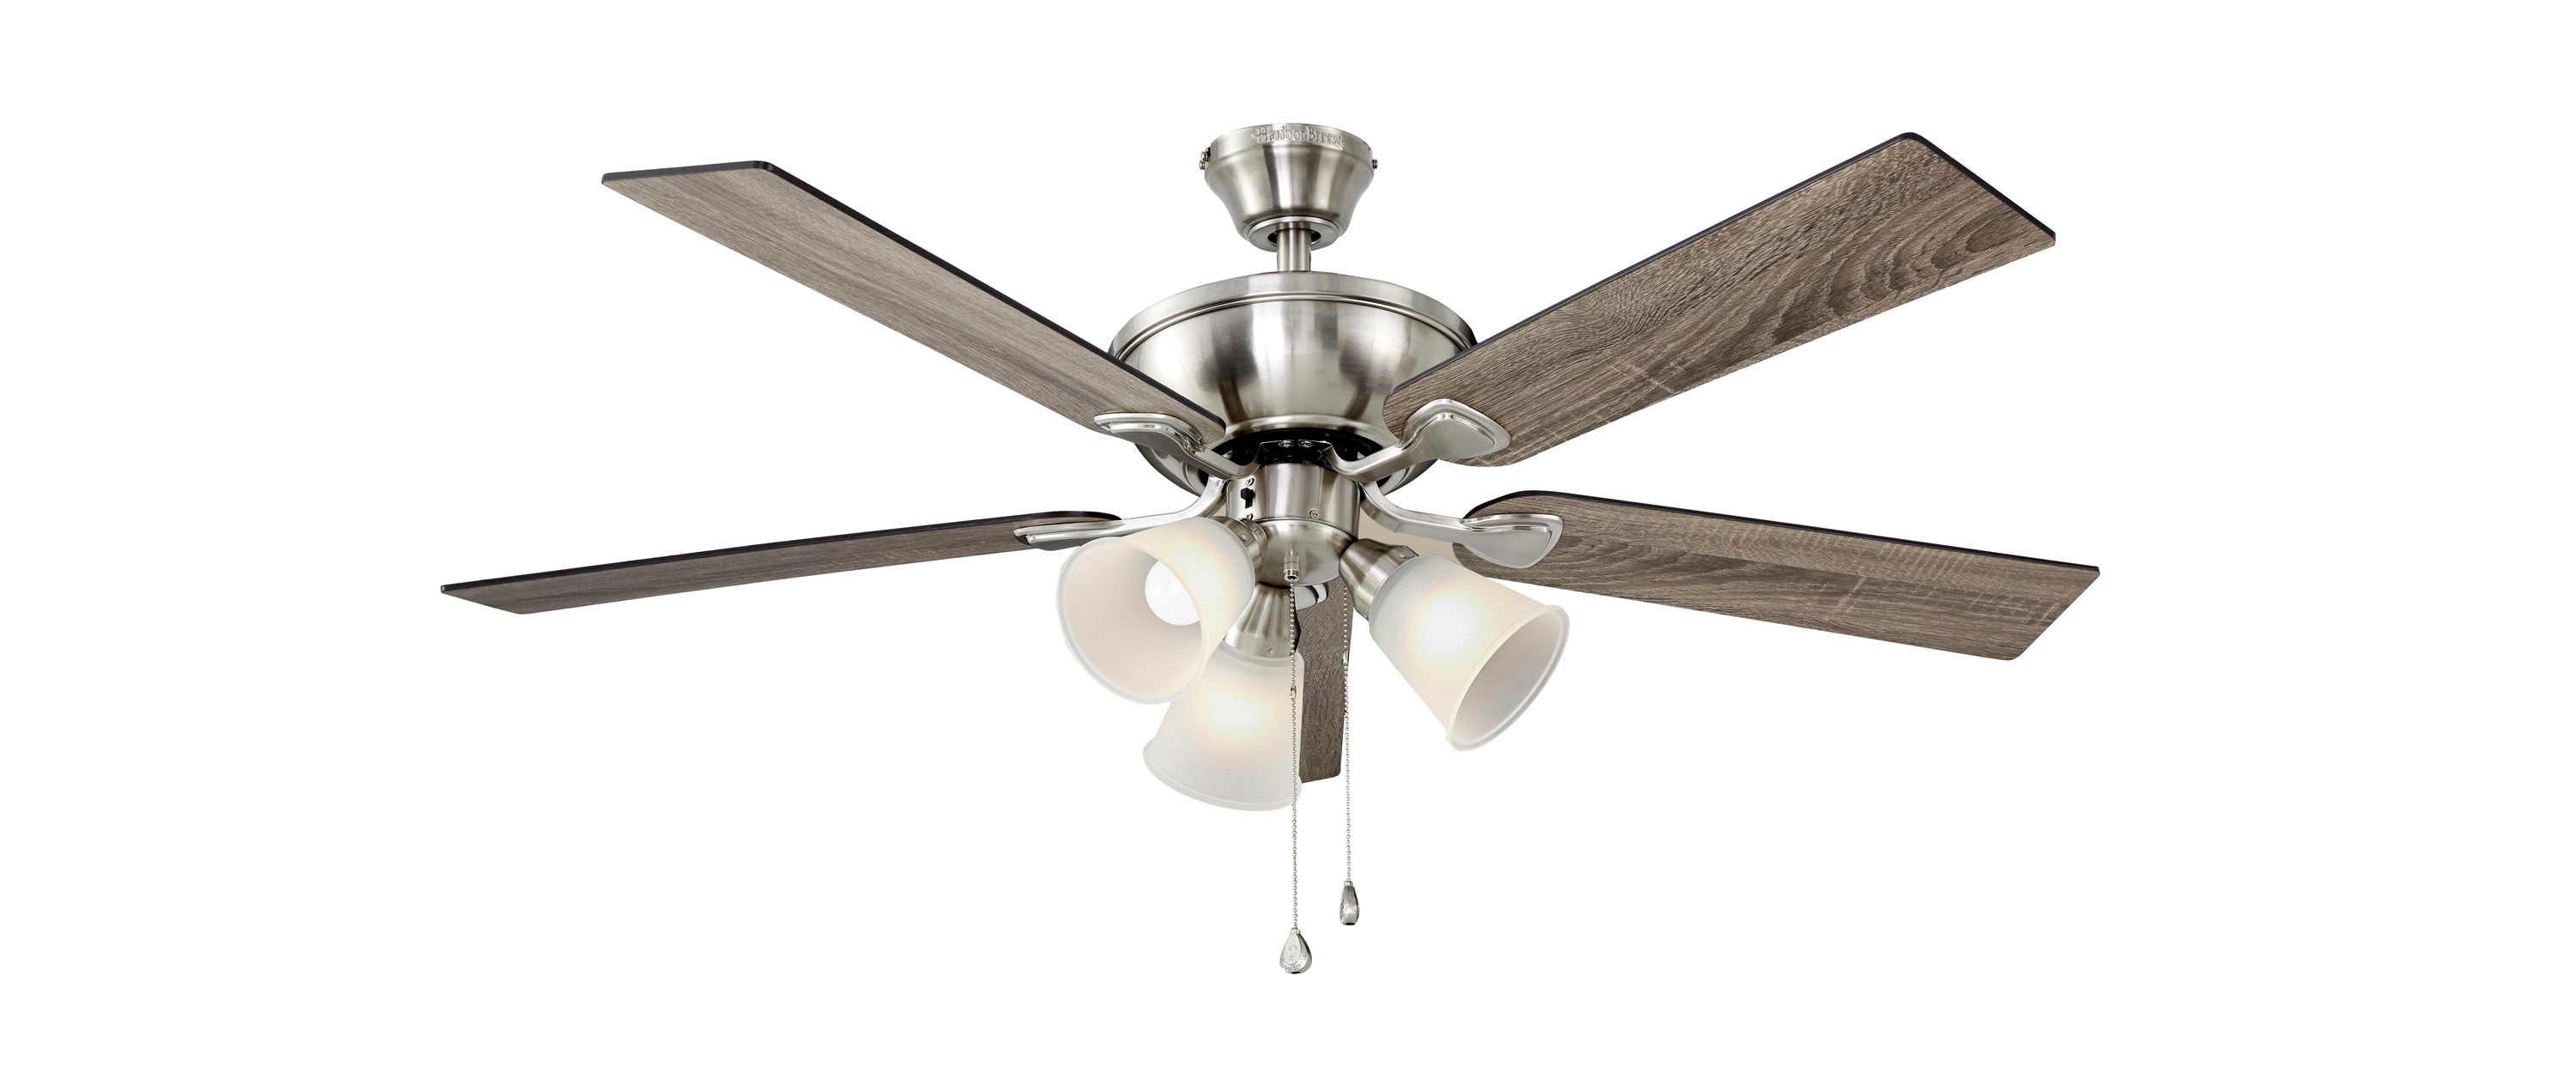 LED Brushed Nickel With Light Kit for sale online Hampton Bay Indoor Ceiling Fan 42 In 